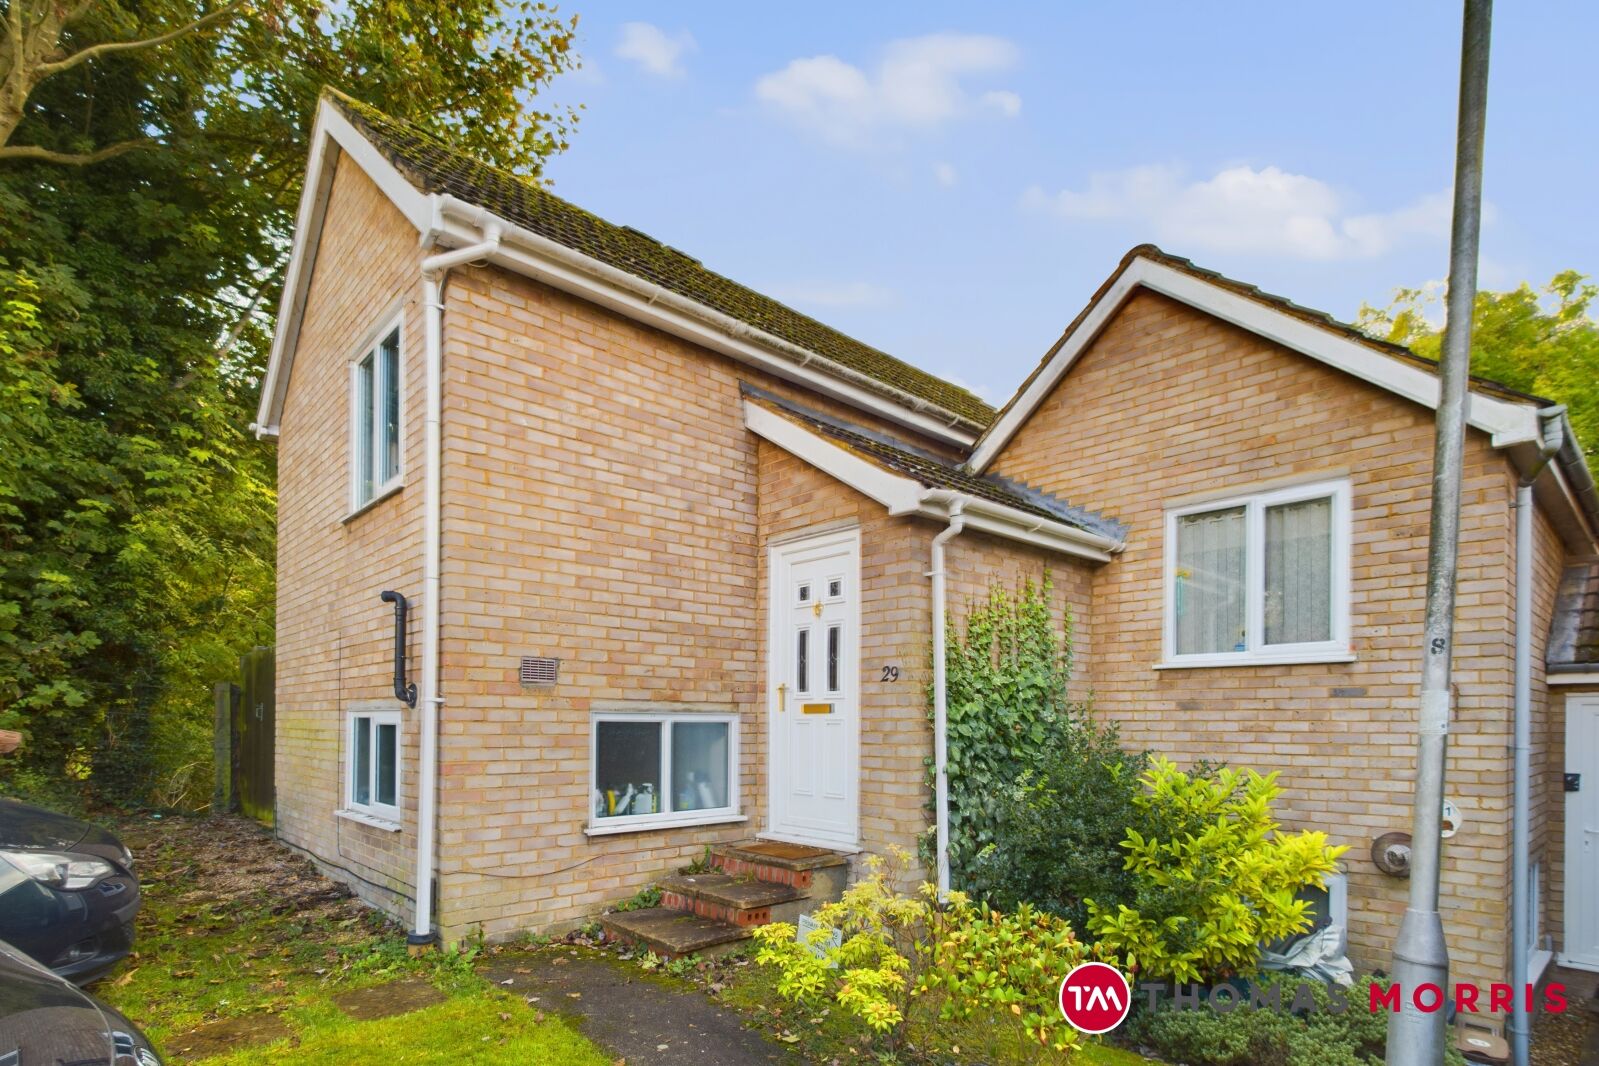 2 bedroom semi detached house for sale Shepherd Close, Royston, SG8, main image